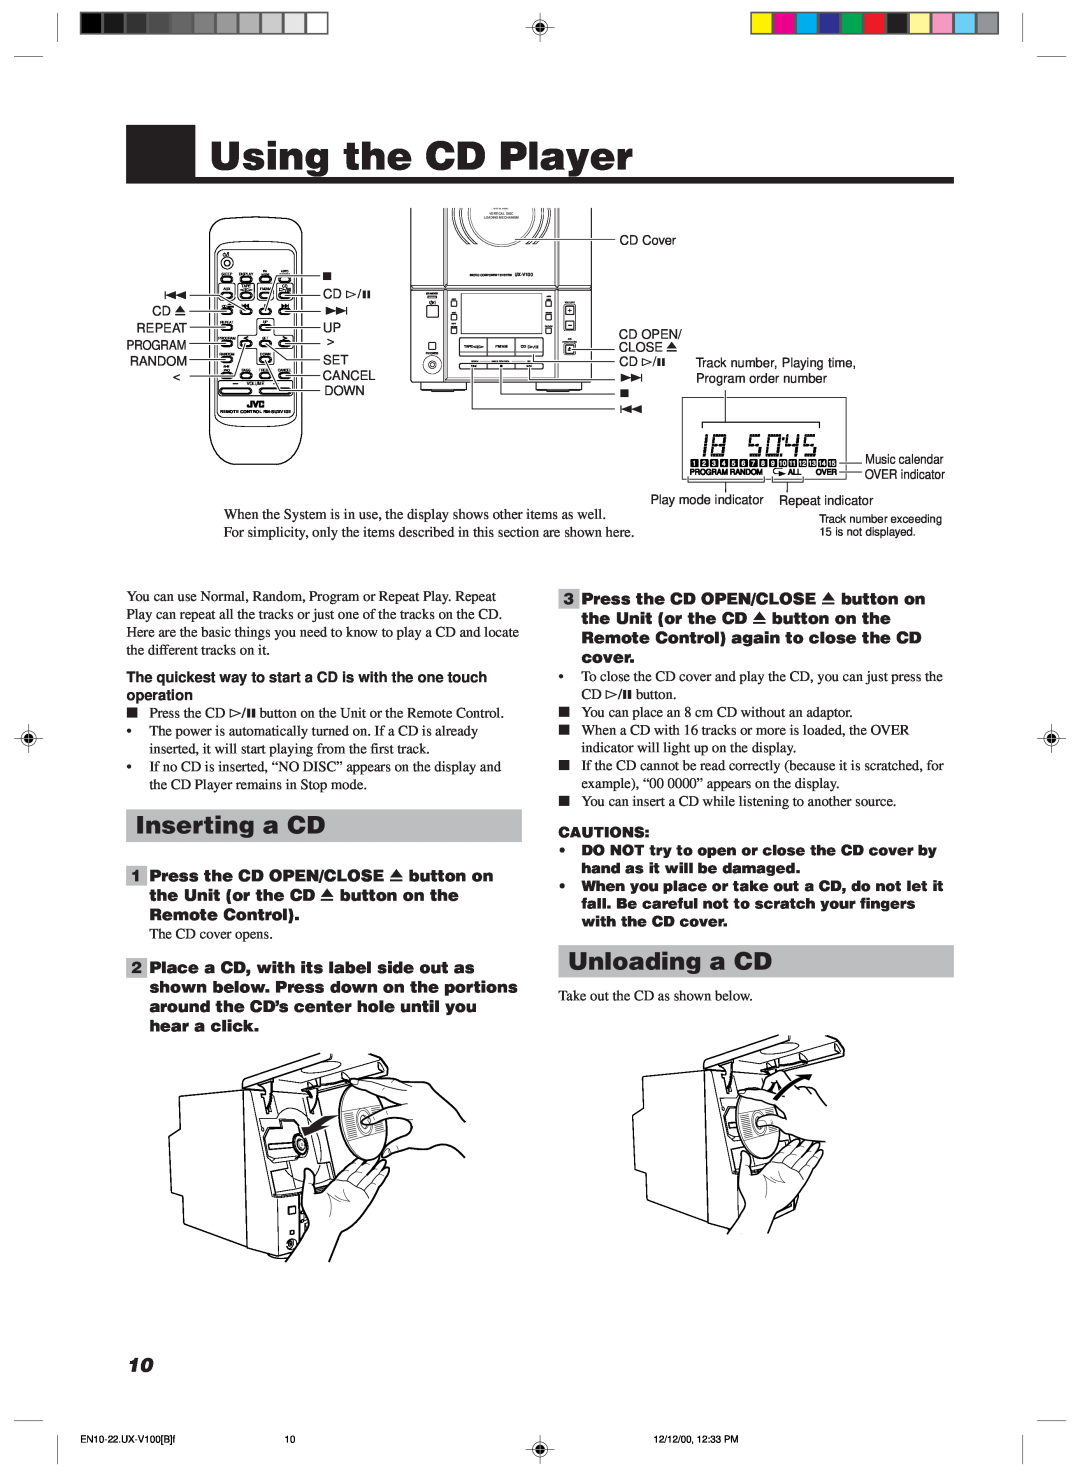 JVC 20981IEN manual Using the CD Player, Inserting a CD, Unloading a CD, Remote Control again to close the CD cover 